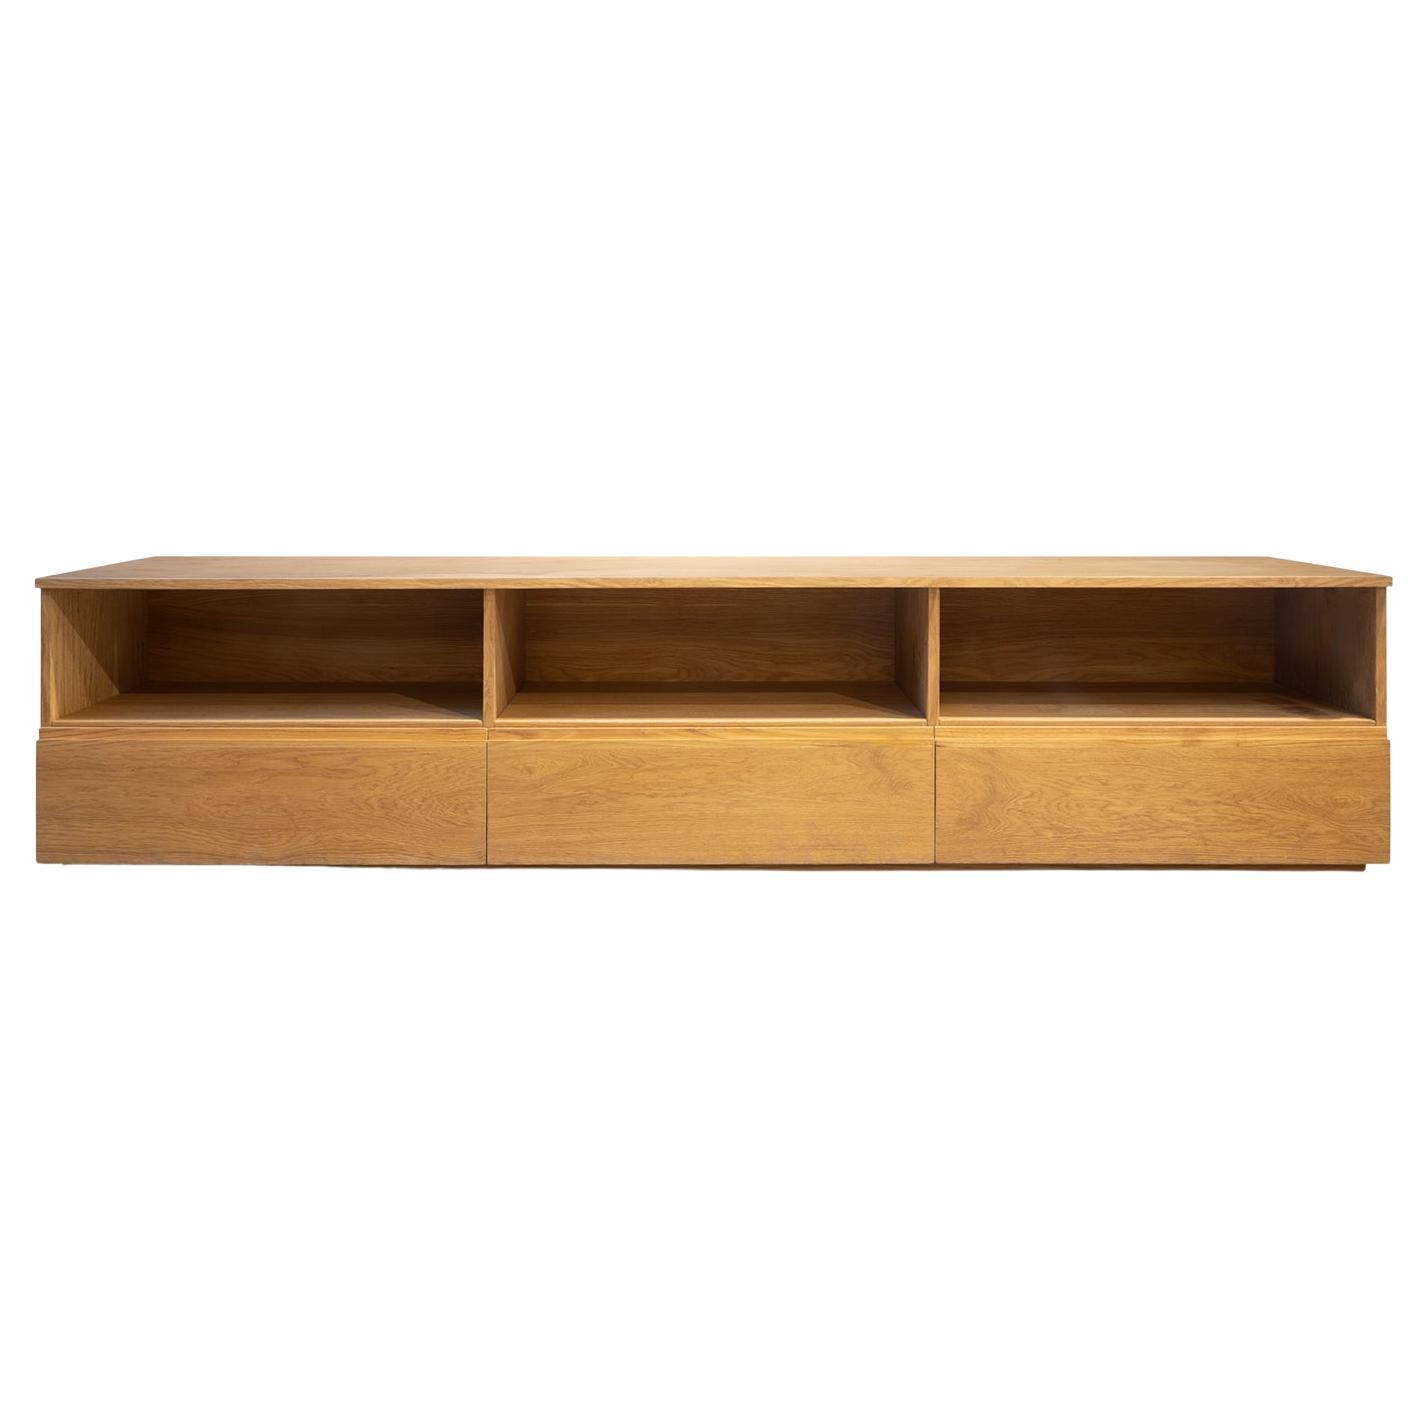 NATUR TV UNIT, where wood texture meets minimal design, accompanies your living room with its most natural elegance... Natur Television Unit would be a beautiful choice for your cozy living room. Also you can hide all the clutters with its drawers